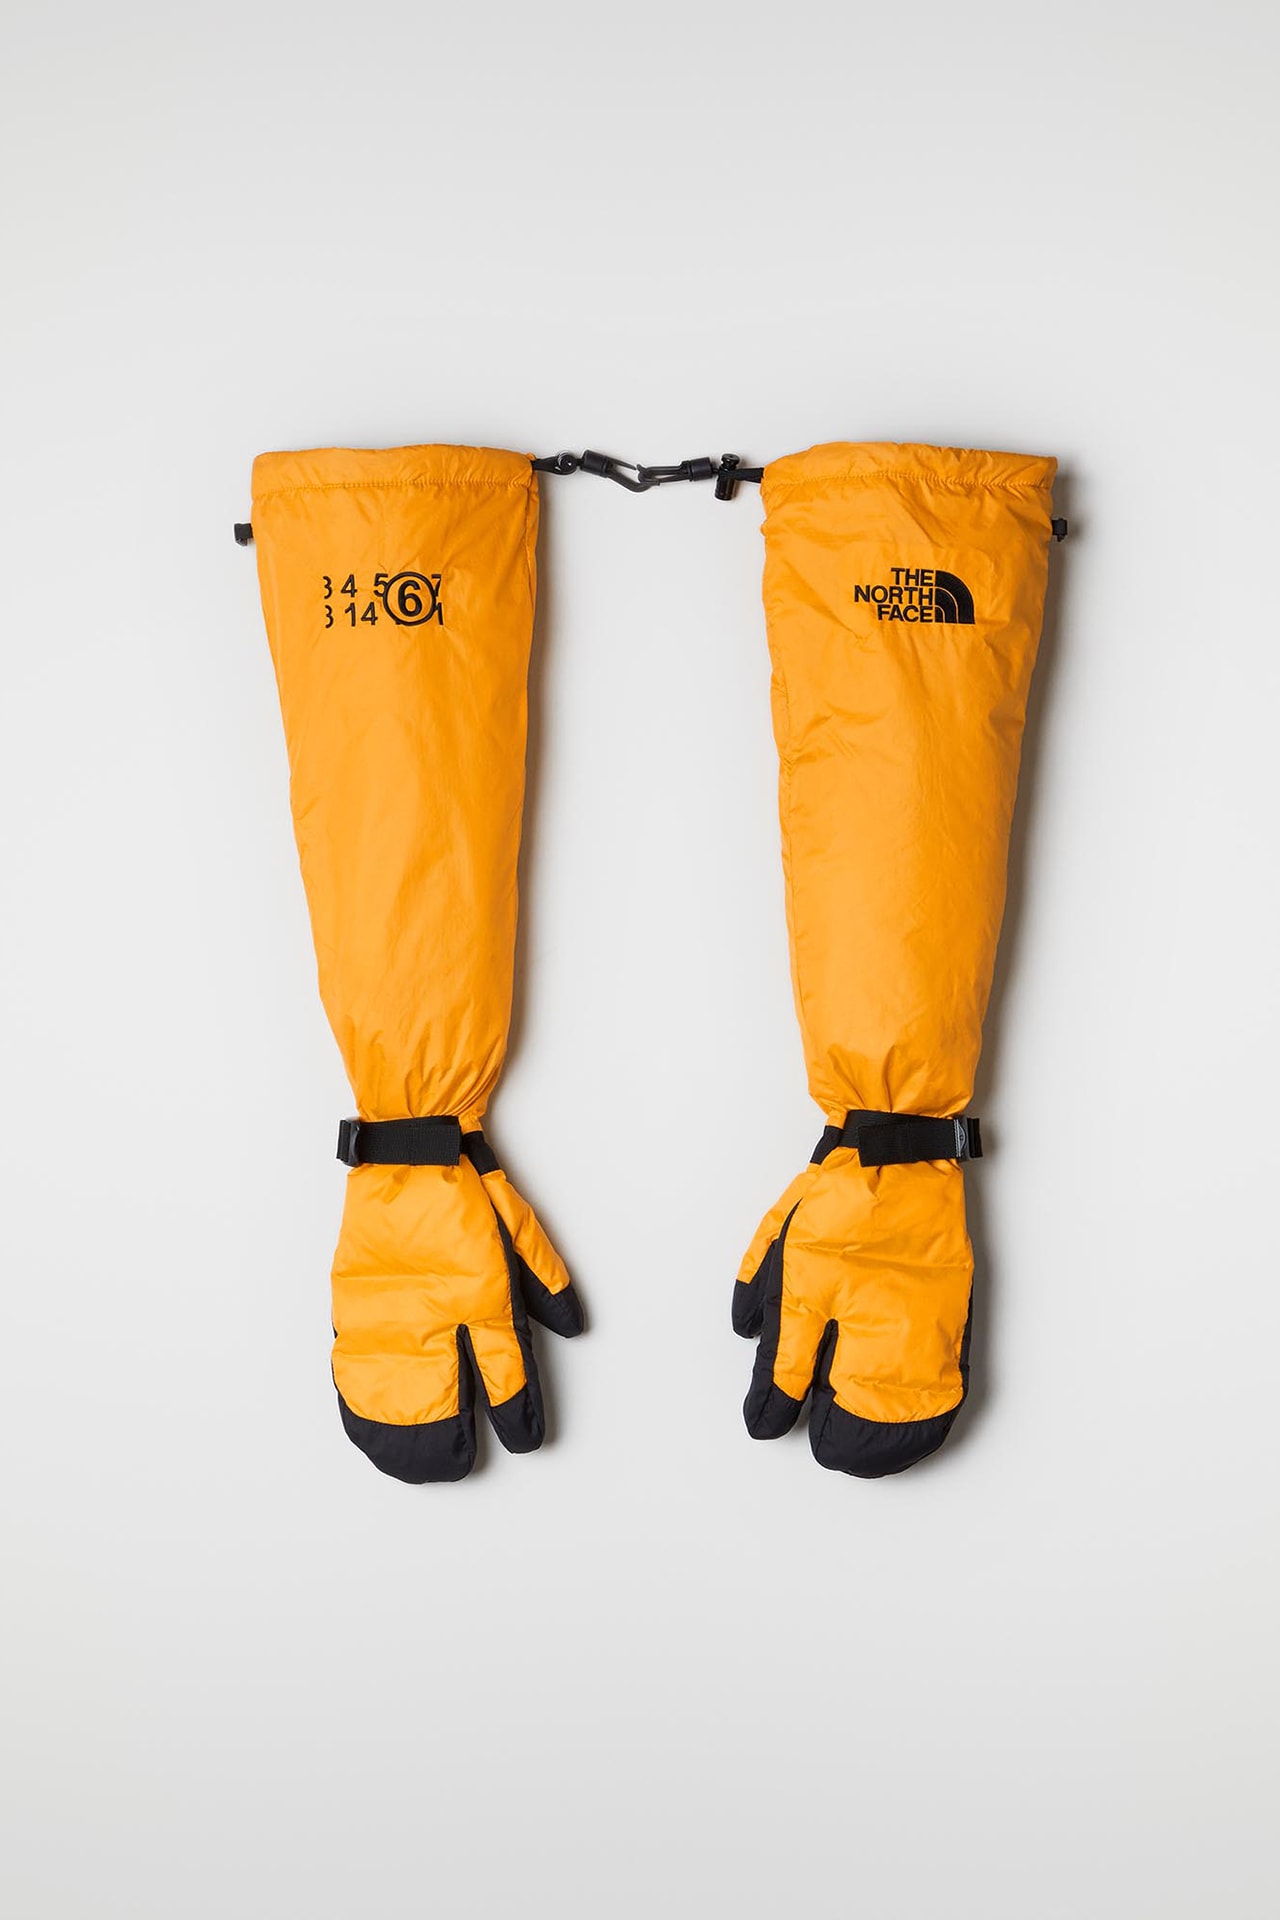 MM6 Maison Margiela The North Face Collaboration Fall Winter 2020 Tabi Mittens Yellow